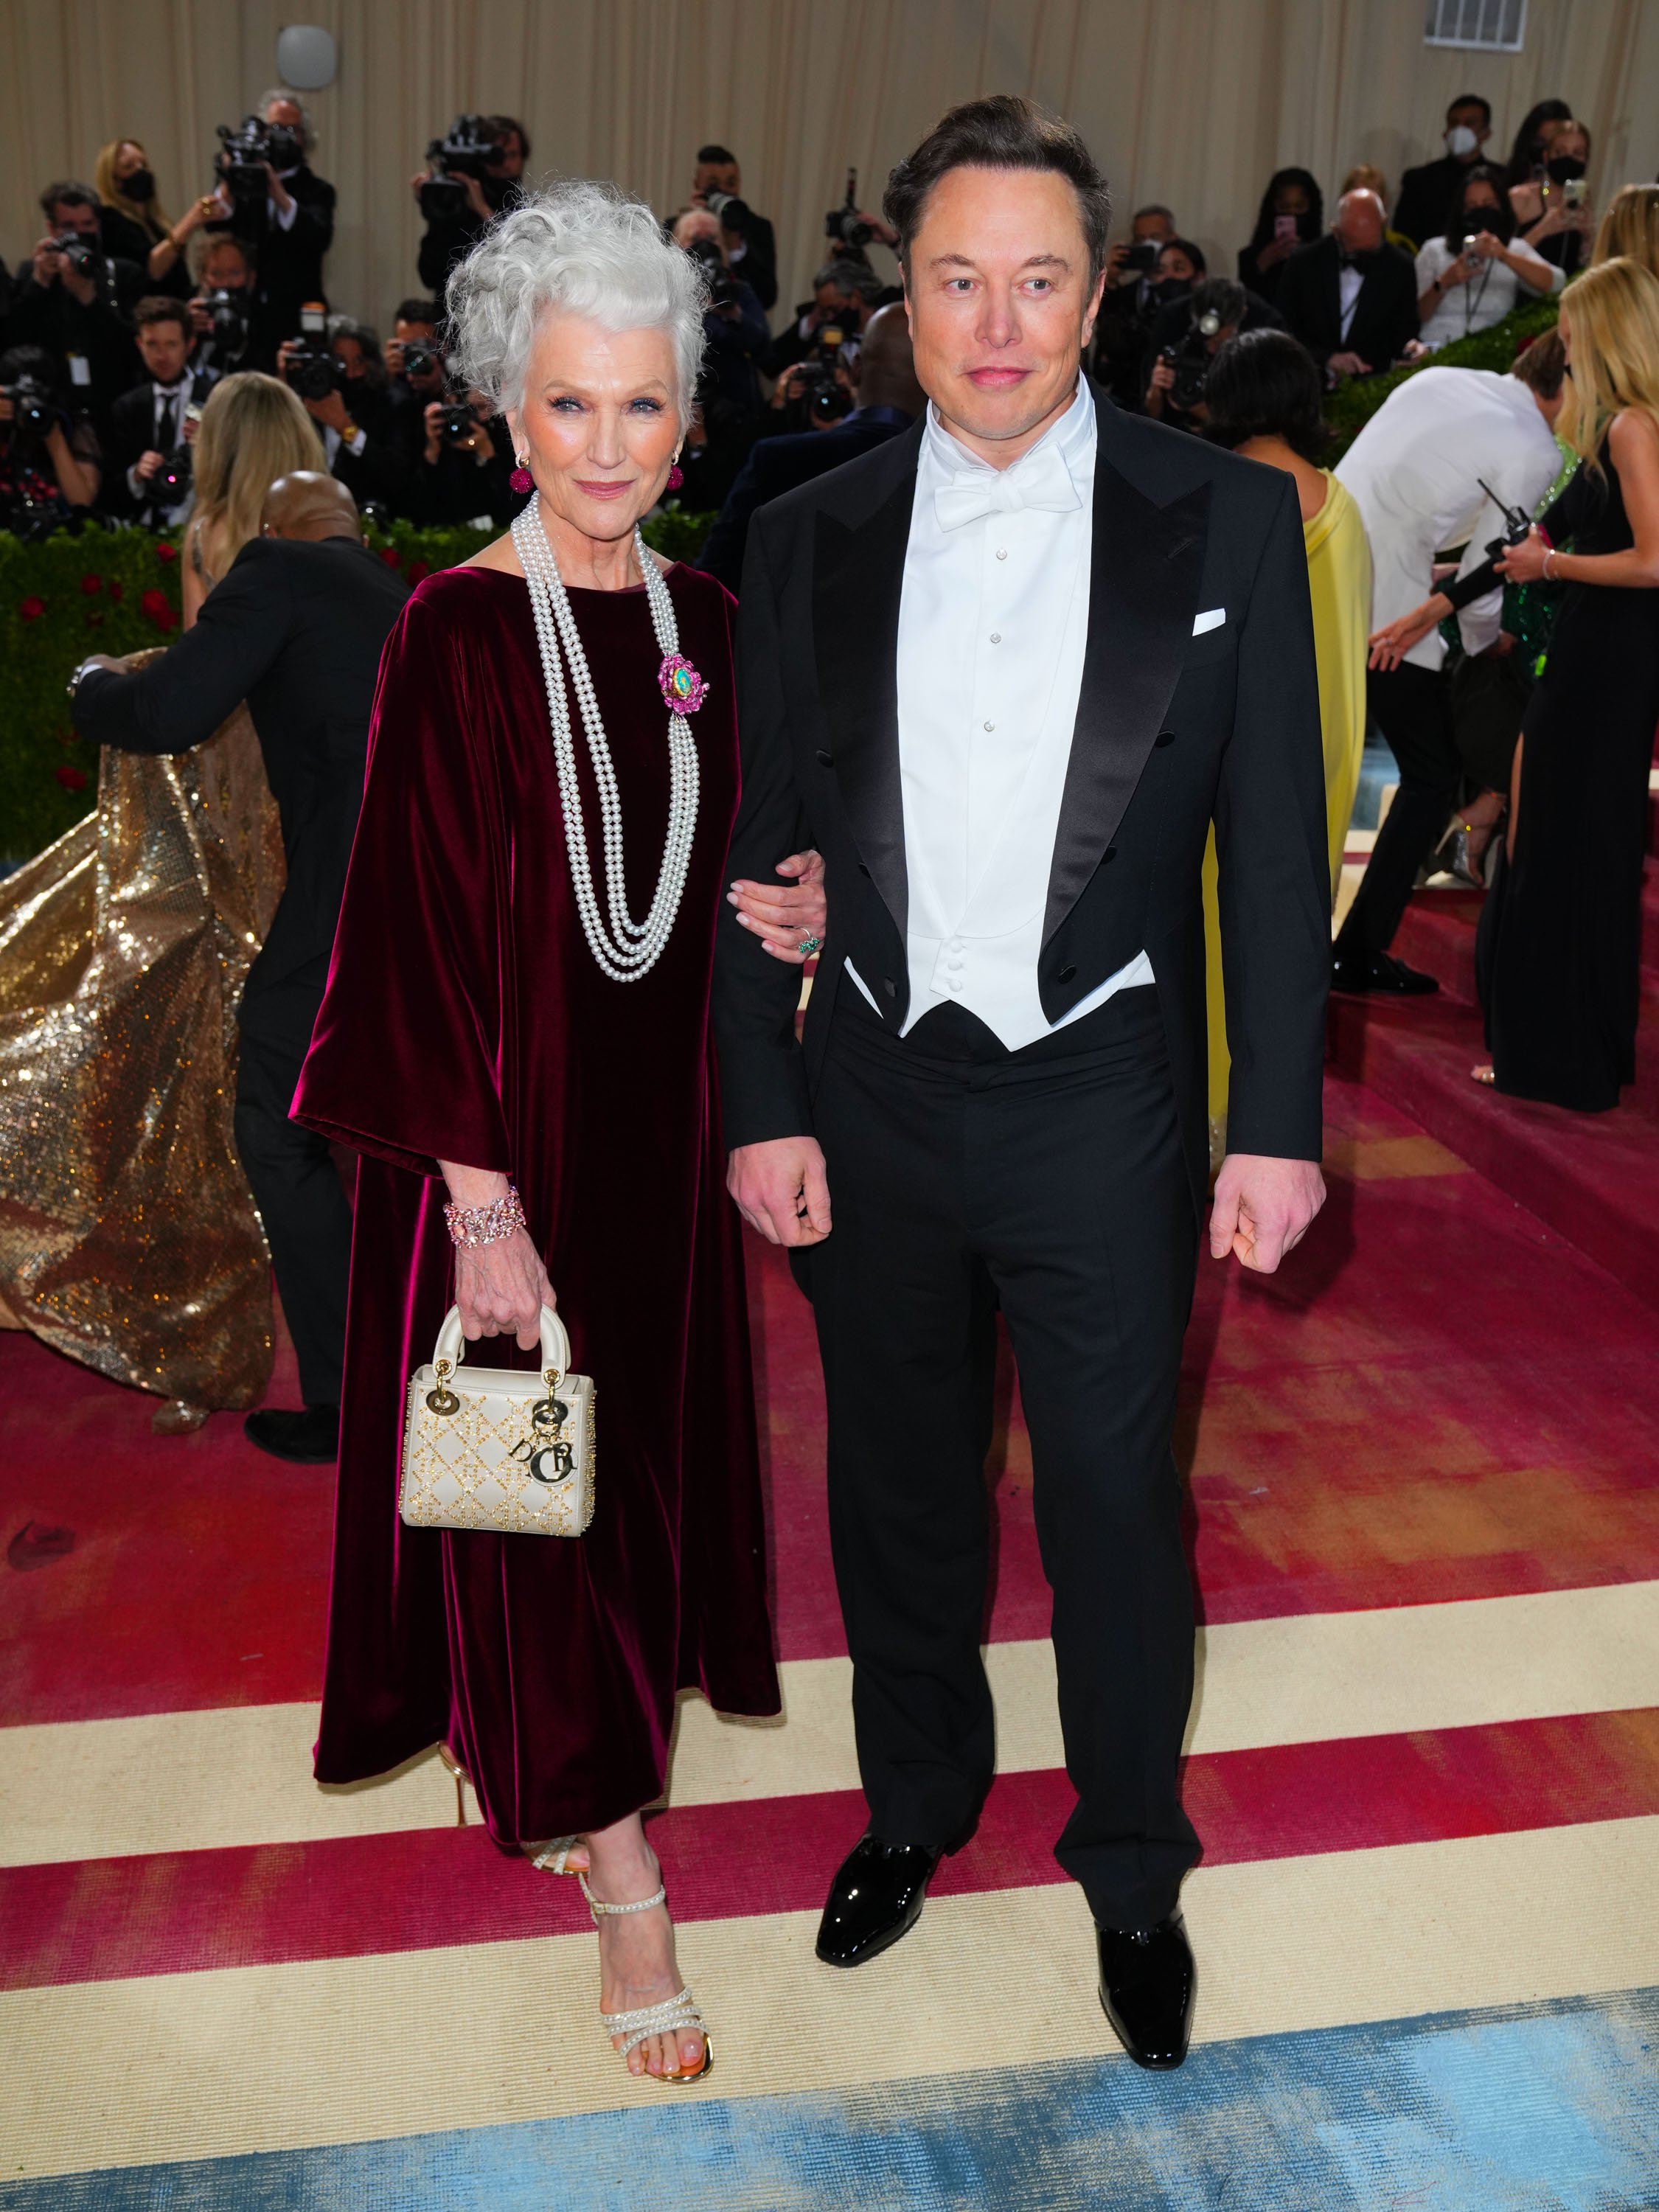 Maye Musk and Elon Musk attend The 2022 Met Gala Celebrating "In America: An Anthology of Fashion" at The Metropolitan Museum of Art on May 2, 2022 in New York City. | Source: Getty Images